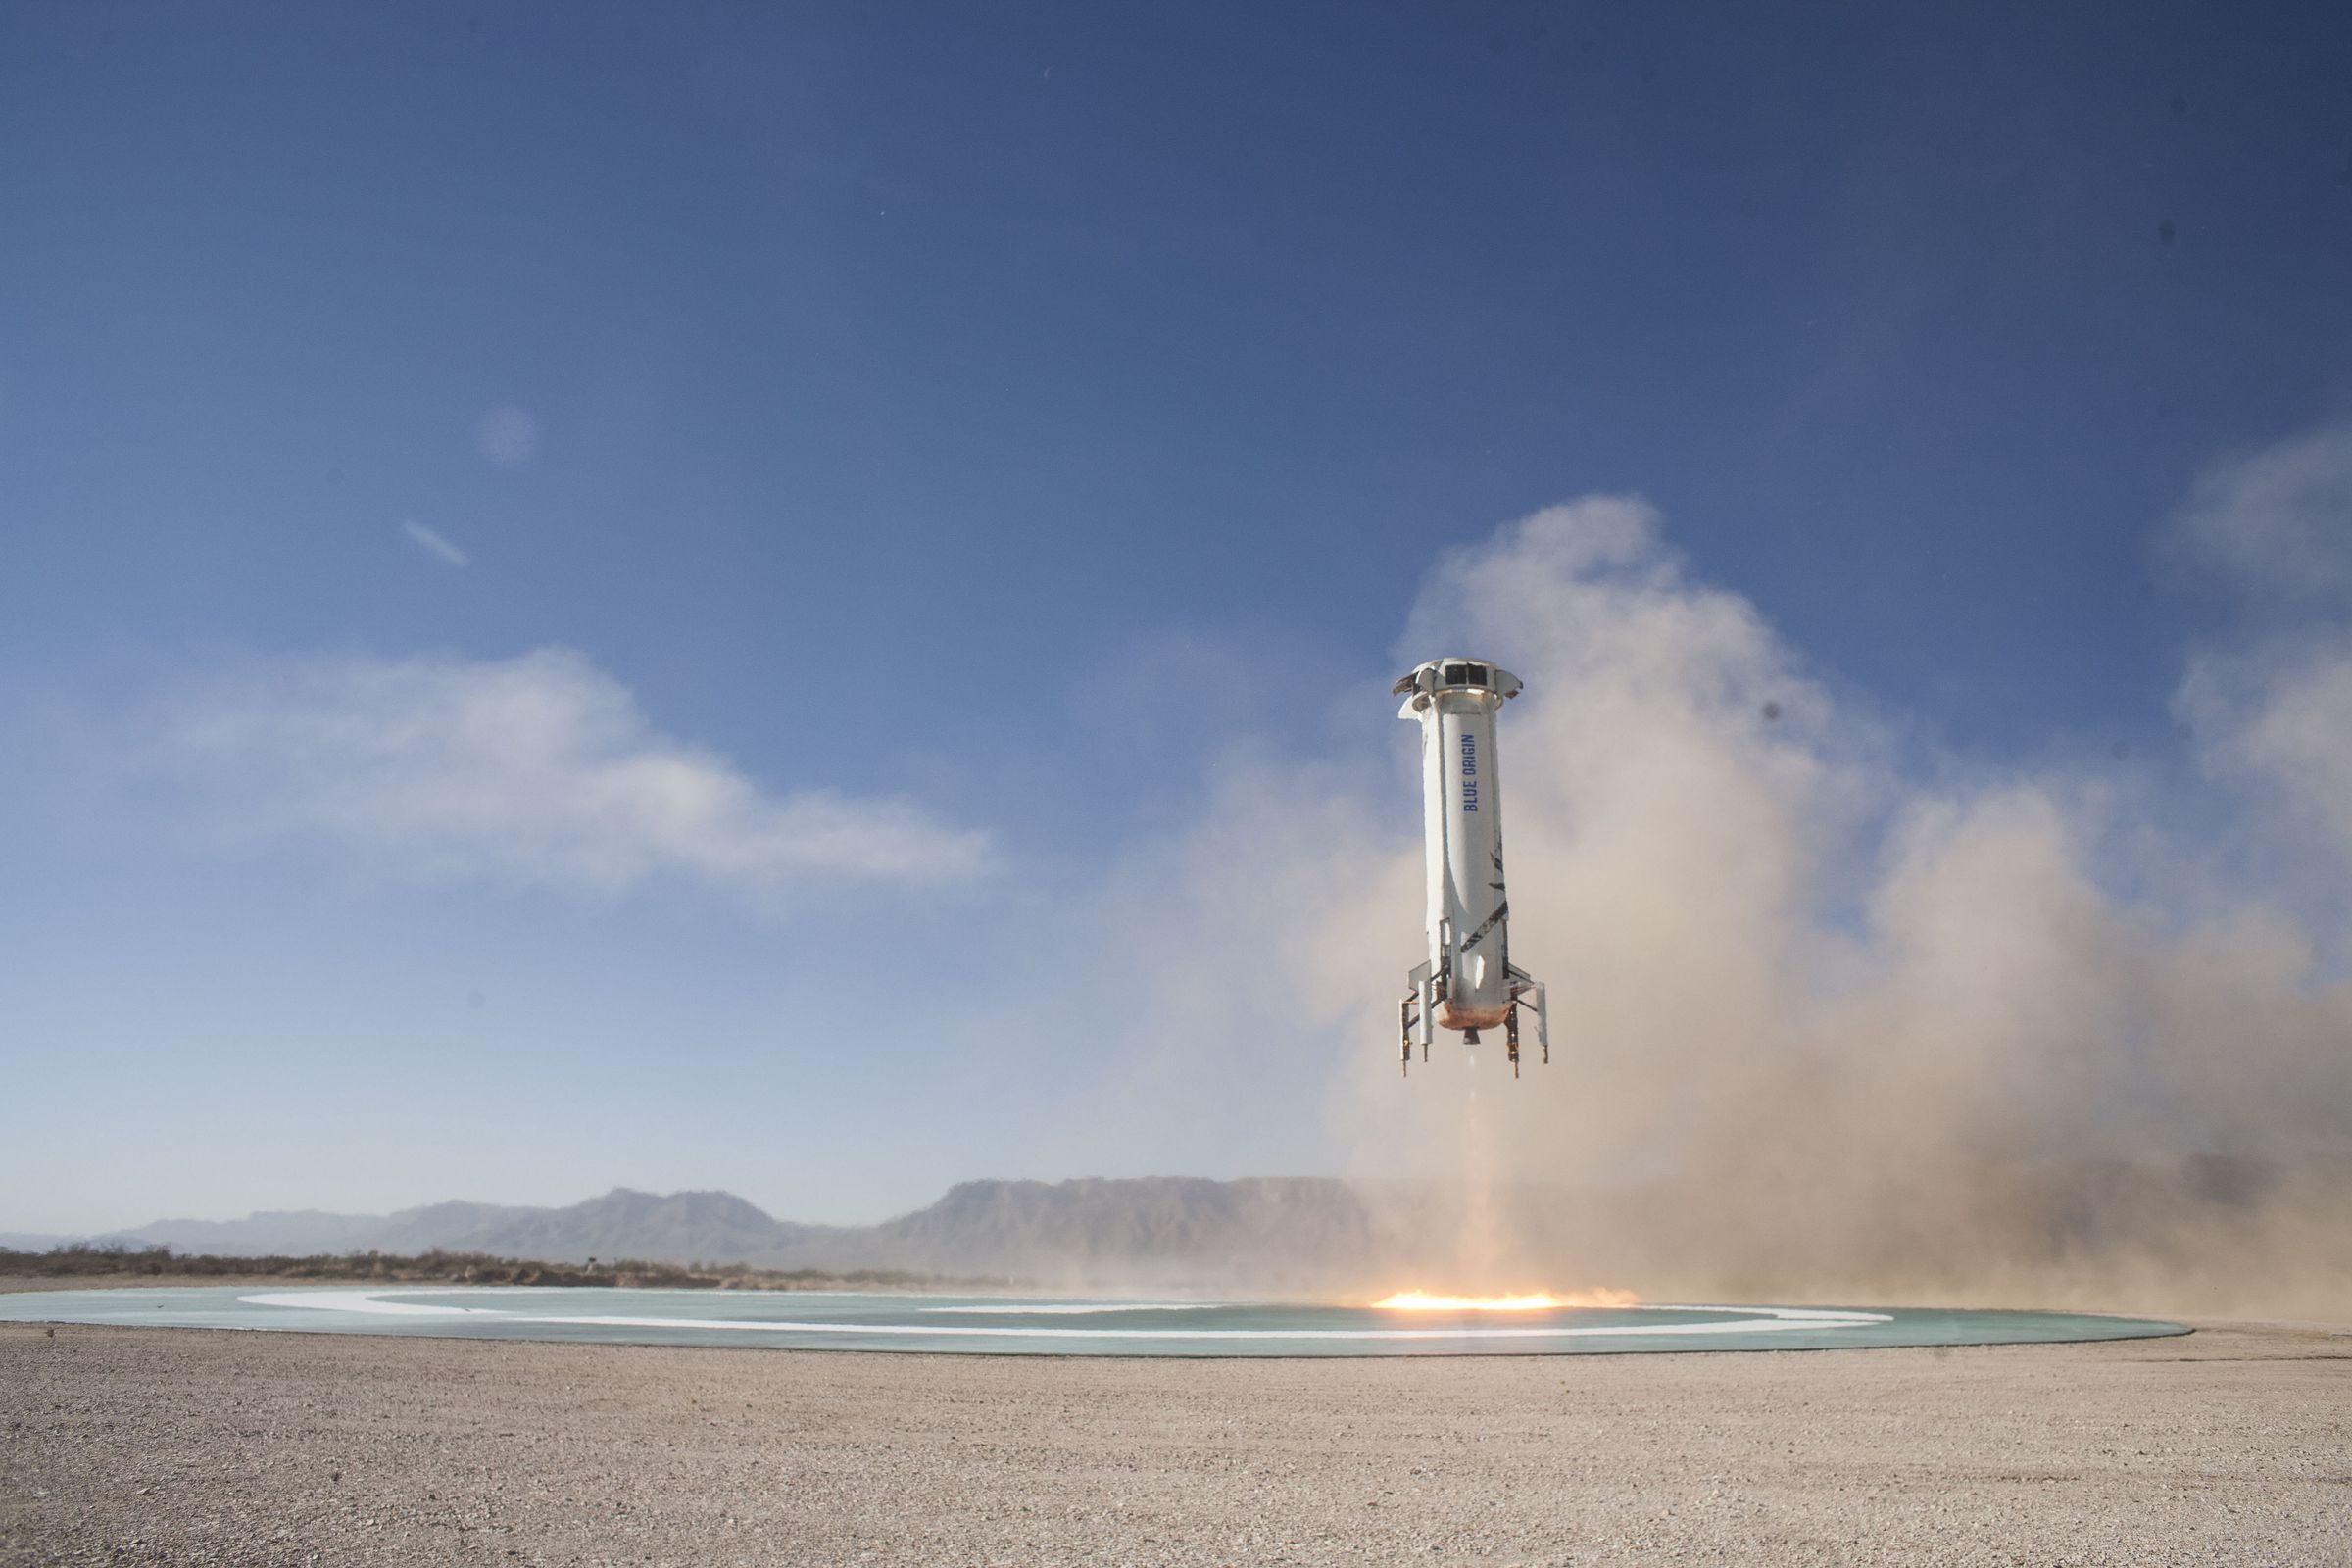 New Shepard Booster landing on the pad in West Texas.